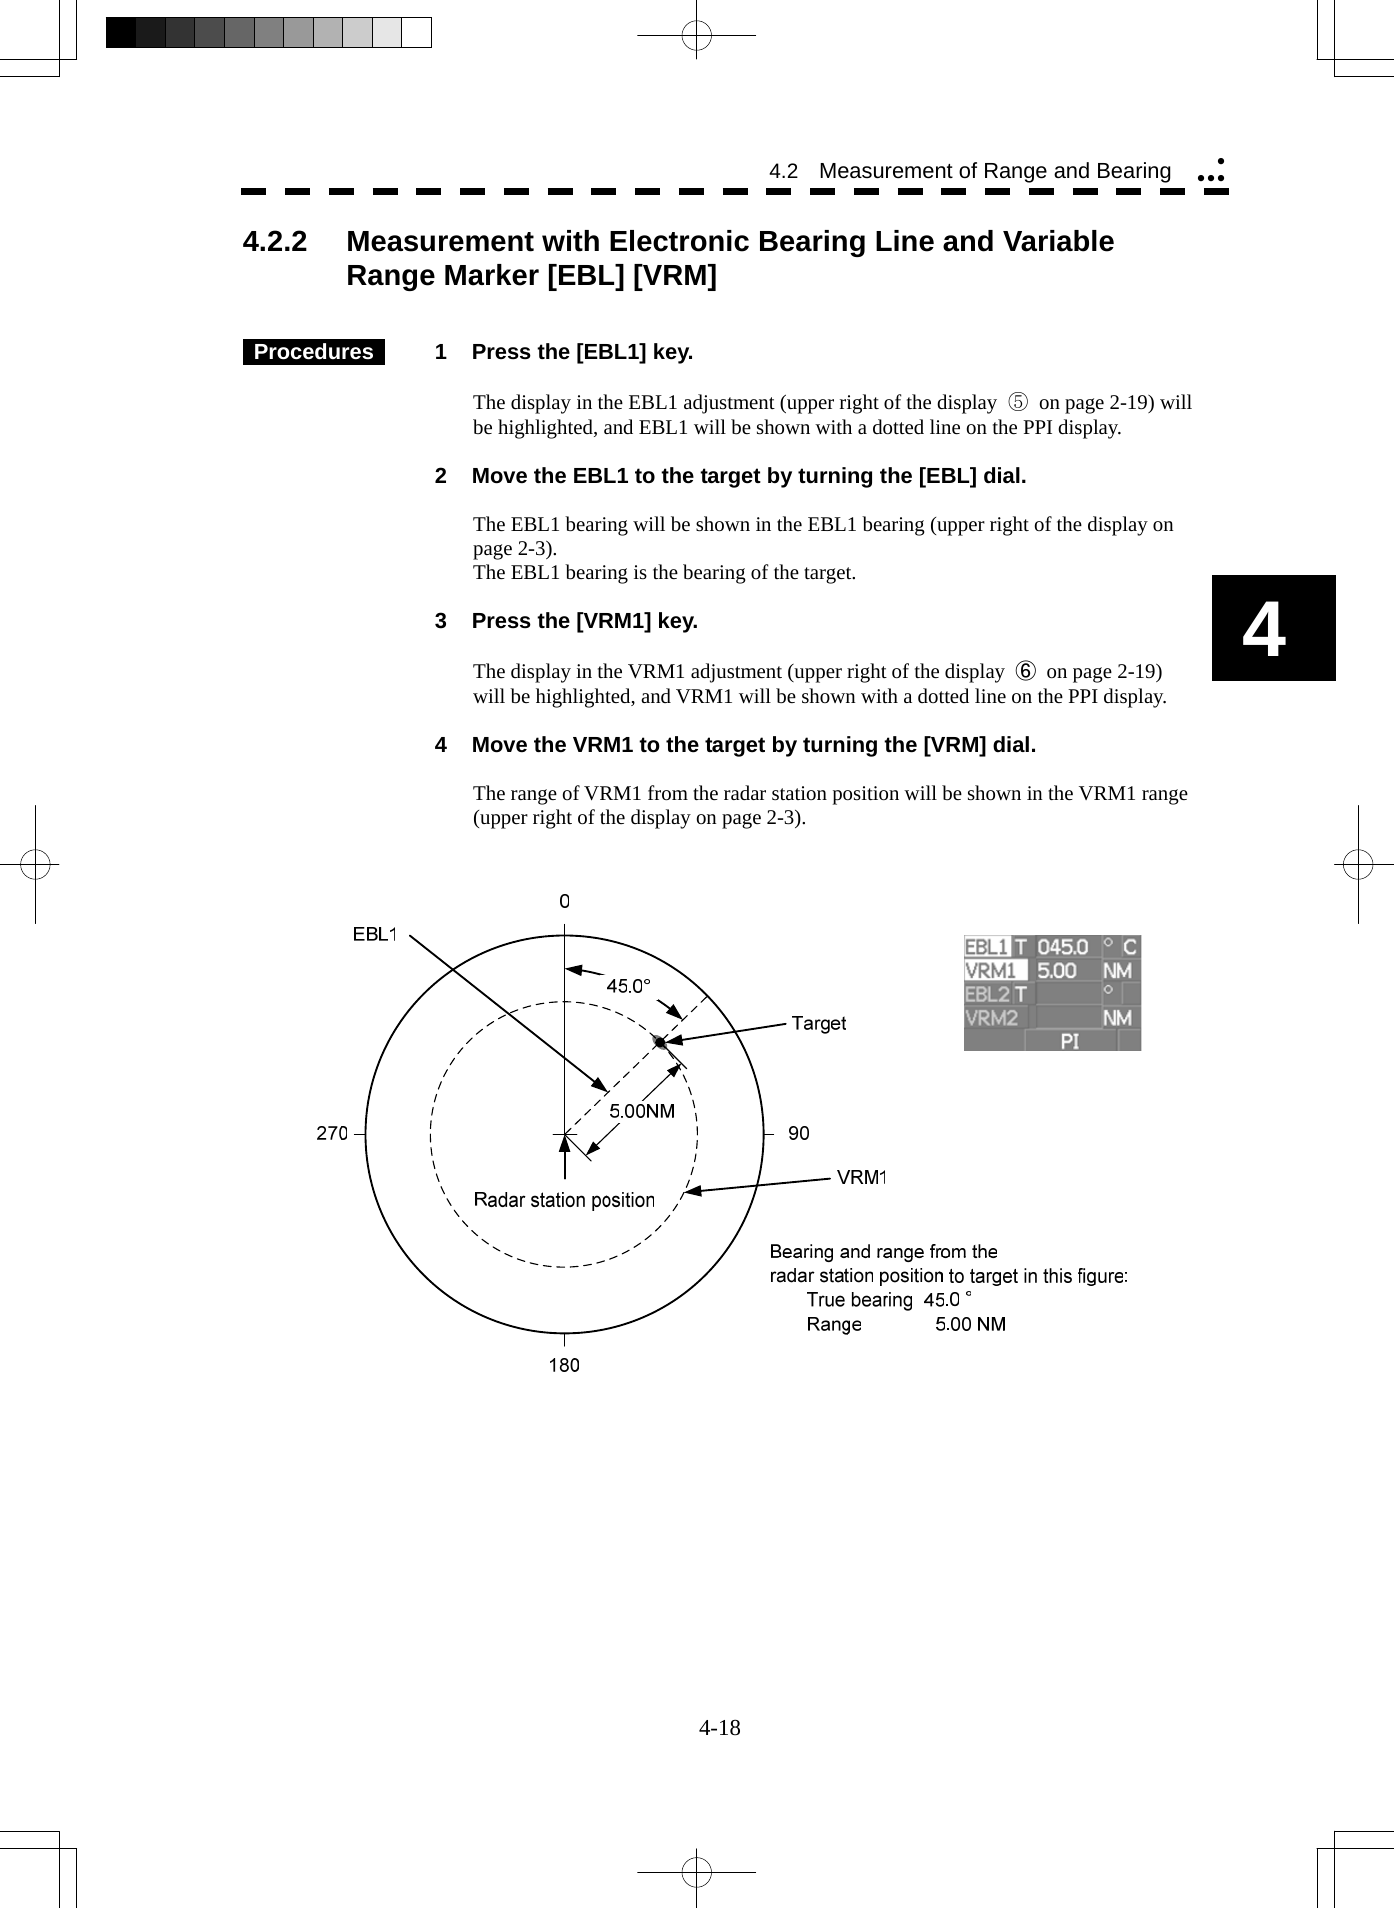   4-18 4 4.2  Measurement of Range and Bearing yyyy4.2.2  Measurement with Electronic Bearing Line and Variable Range Marker [EBL] [VRM]      Procedures   1  Press the [EBL1] key.  The display in the EBL1 adjustment (upper right of the display  ⑤  on page 2-19) will be highlighted, and EBL1 will be shown with a dotted line on the PPI display.    2  Move the EBL1 to the target by turning the [EBL] dial.  The EBL1 bearing will be shown in the EBL1 bearing (upper right of the display on page 2-3). The EBL1 bearing is the bearing of the target.    3  Press the [VRM1] key.  The display in the VRM1 adjustment (upper right of the display  ⑥  on page 2-19) will be highlighted, and VRM1 will be shown with a dotted line on the PPI display.    4  Move the VRM1 to the target by turning the [VRM] dial.  The range of VRM1 from the radar station position will be shown in the VRM1 range (upper right of the display on page 2-3).      